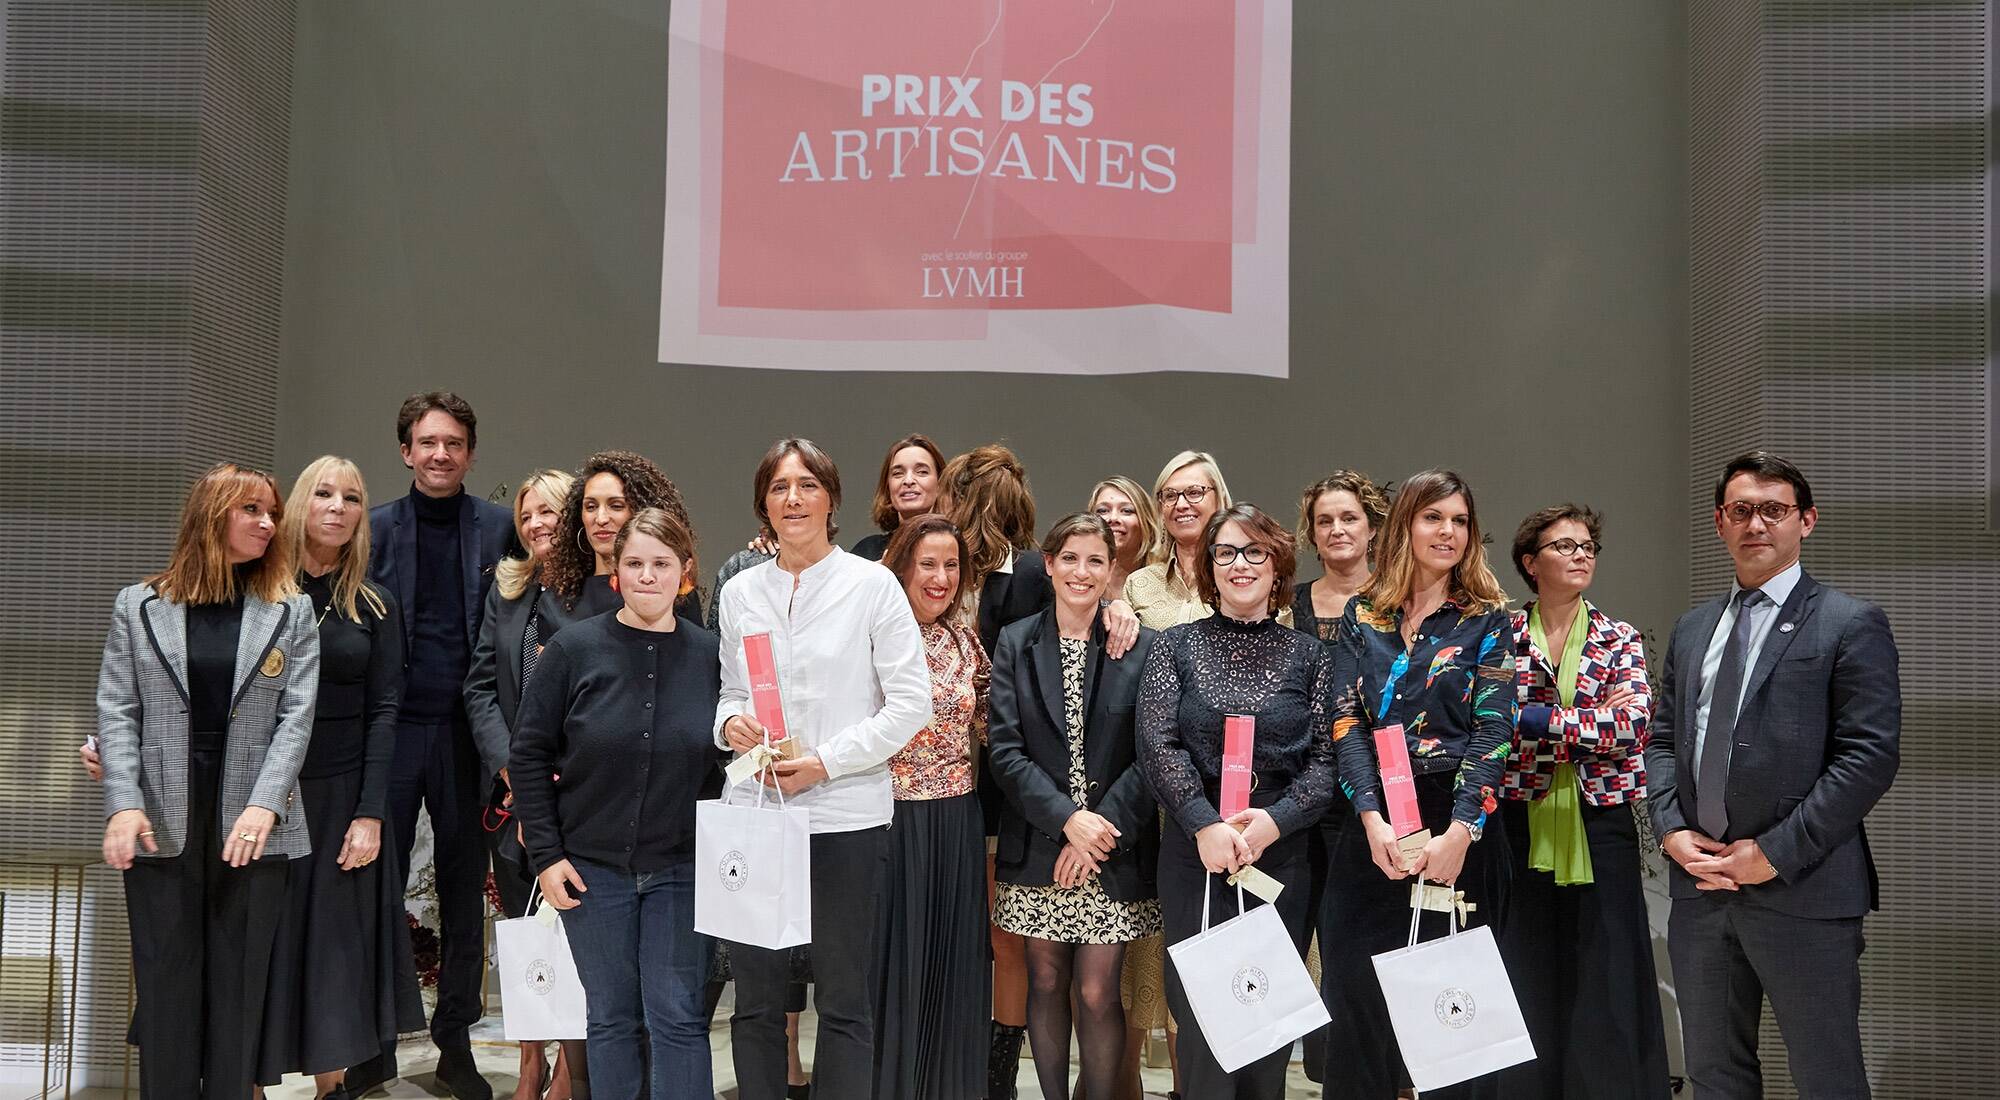 LVMH supports the ELLE magazines in the launch of the Prix des Artisanes,  aiming to promote the know-how of craftswomen - LVMH